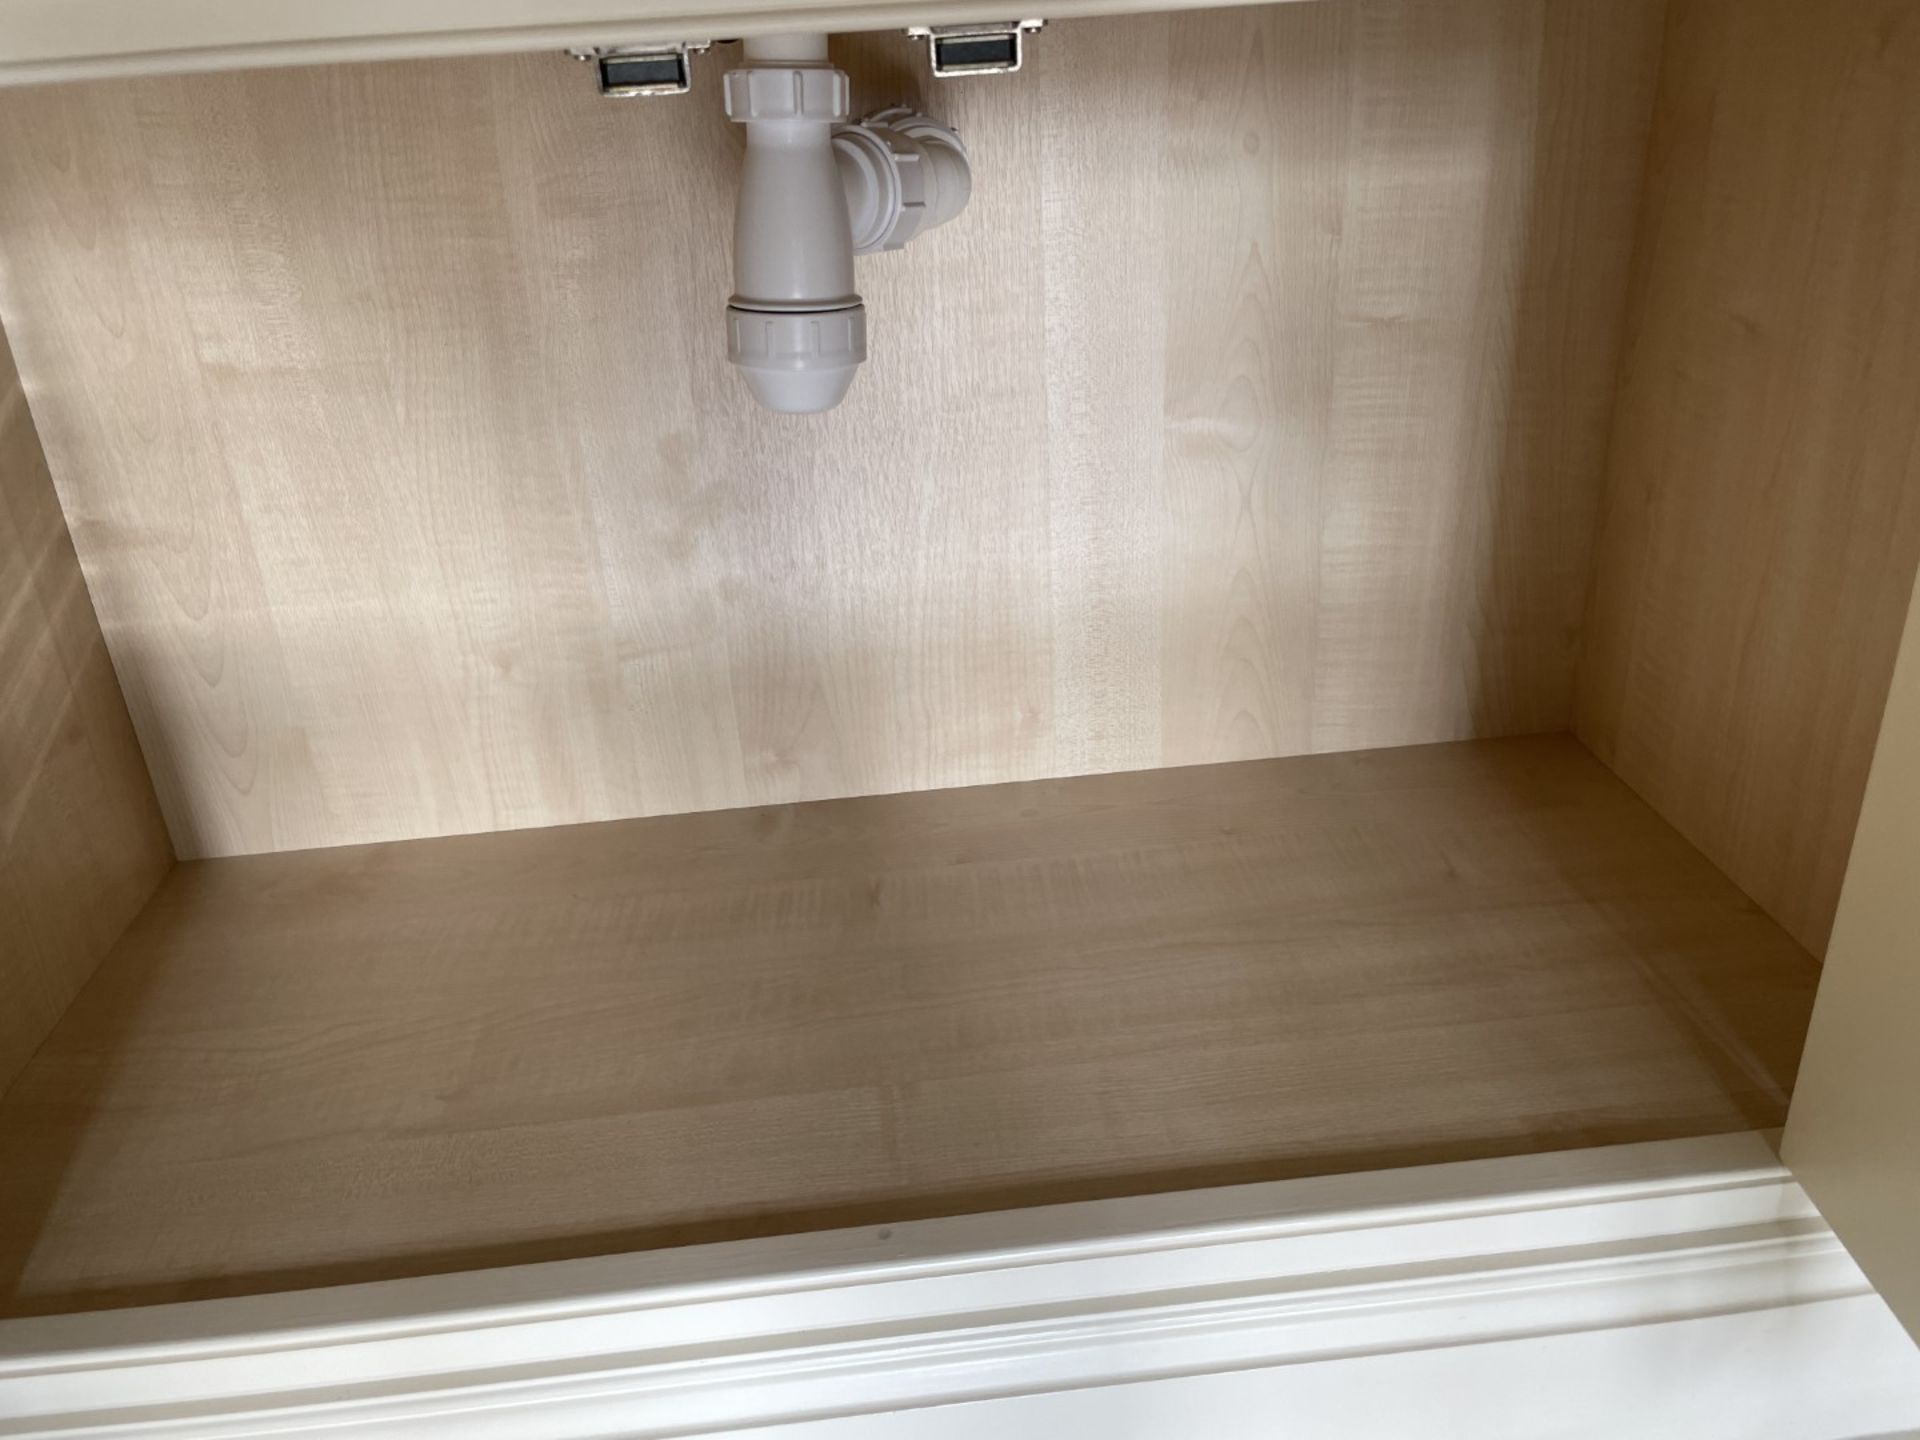 1 x Bespoke Marble-topped Solid Wood Double Vanity Unit with 2 x Villeroy & Boch Basins + Taps - Image 30 of 33